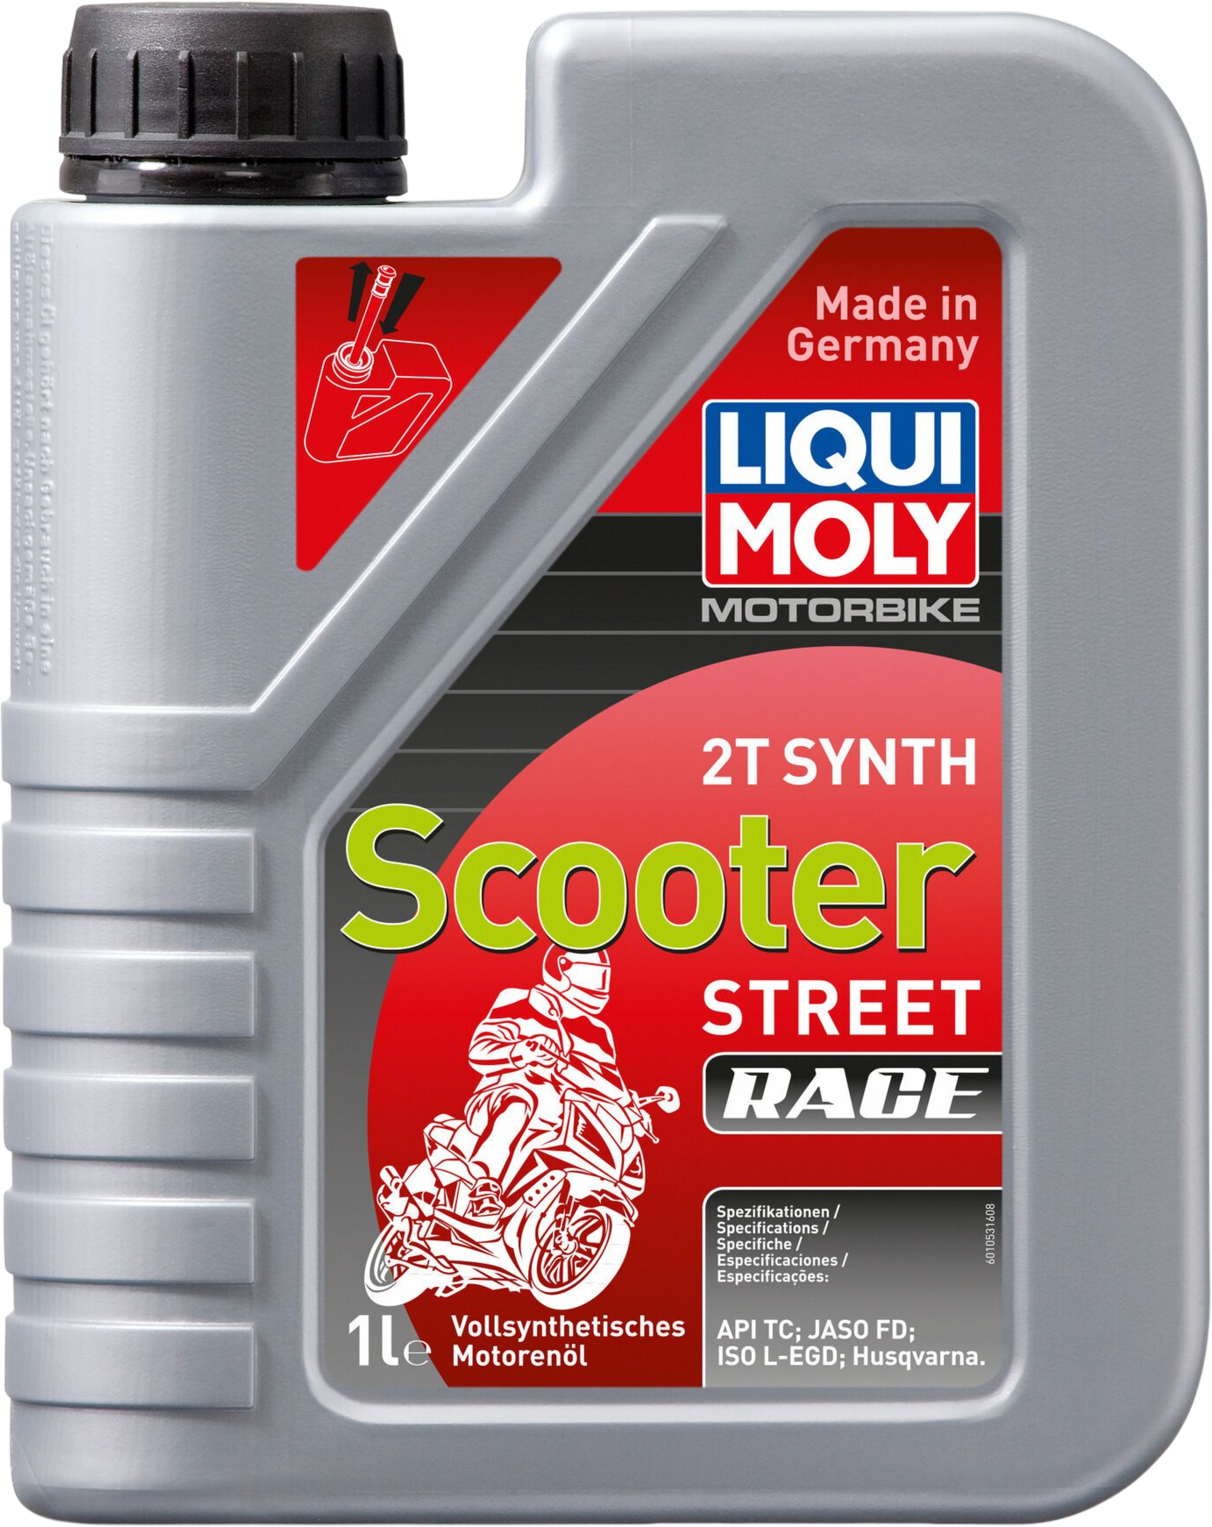 Liqui Moly Motorbike 2T Synth Scooter Street Race, 6 x 1 lt detail 2